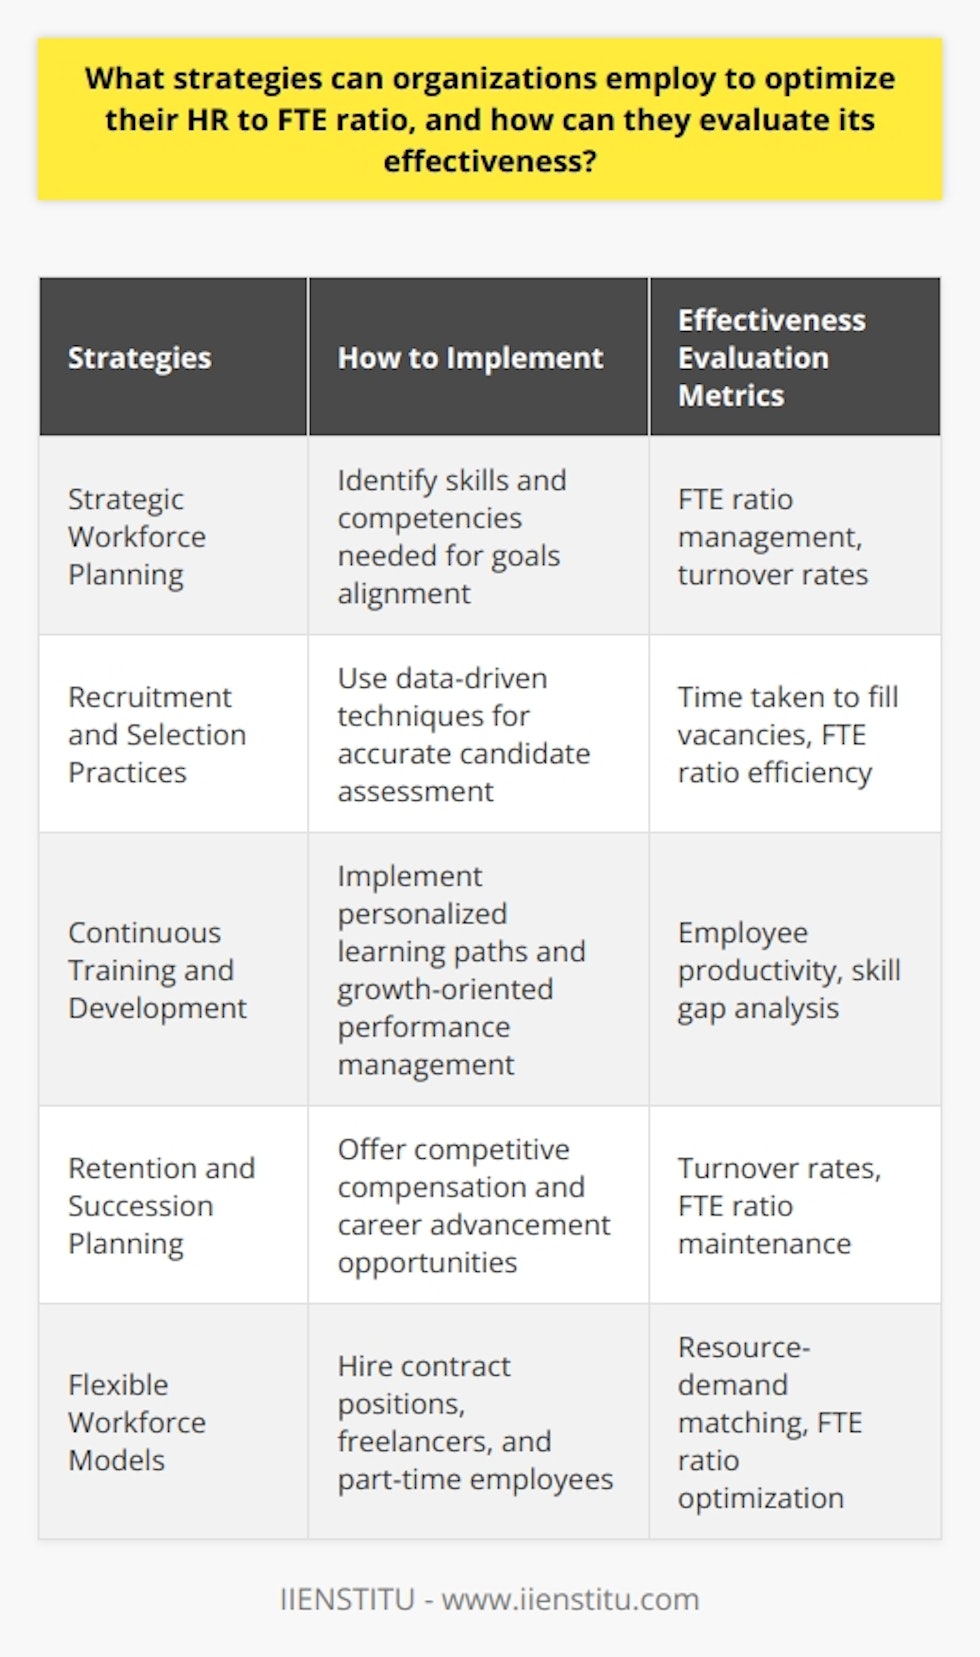 Strategic Workforce Planning is a key strategy that organizations can employ to optimize their HR to FTE ratio. This involves identifying the skills and competencies required to achieve organizational goals and aligning them with HR strategies. By understanding the workforce needs and aligning them with business objectives, organizations can effectively manage their HR to FTE ratio.Recruitment and selection practices play a vital role in optimizing the HR to FTE ratio. Organizations should adopt targeted recruitment practices that focus on hiring candidates with skills that match the desired competencies. By using data-driven techniques, such as analytics and artificial intelligence, HR managers can assess candidates' skills and cultural fit more accurately, thereby improving the selection process.Continuous training and development programs are essential for optimizing the HR to FTE ratio. These programs enhance employees' skills and knowledge, enabling them to adapt to changing business environments. Personalized learning paths and growth-oriented performance management systems ensure employees are aligned with company objectives, which in turn maintains an optimal FTE ratio through improved competence.Retention and succession planning also contribute to optimizing the HR to FTE ratio. Organizations should implement retention strategies, such as offering competitive compensation, work-life balance initiatives, and career advancement opportunities. These strategies help in reducing employee attrition rates and maintaining a healthy HR to FTE ratio. Additionally, succession planning allows organizations to identify and develop high-potential employees for future leadership roles, ensuring a steady talent pipeline.Furthermore, organizations can optimize their HR to FTE ratio by adopting flexible workforce models. This can include hiring contract positions, freelancers, and part-time employees, which allows companies to maintain a lean and efficient workforce while scaling up or down based on business needs. This flexibility optimizes the HR to FTE ratio by matching resources with demands.To evaluate the effectiveness of HR to FTE optimization strategies, organizations can track several key metrics. Employee productivity can be examined by analyzing output per employee, which helps determine the efficiency of HR to FTE ratio management. Lower turnover rates indicate successful implementation of retention strategies, contributing to a healthier HR to FTE ratio.Monitoring the time taken to fill vacancies is also crucial. A shorter time to fill vacancies reflects effective workforce planning and impacts the HR to FTE ratio. Additionally, measuring employee satisfaction through engagement surveys and regular feedback helps gauge satisfaction levels, which can positively influence the HR to FTE ratio.Conducting a skill gap analysis is another important metric to evaluate the effectiveness of HR to FTE optimization strategies. This assessment helps identify areas for improvement by comparing required skills with employees' competencies, demonstrating the impact of training and development initiatives.In conclusion, organizations can optimize their HR to FTE ratio by aligning workforce strategies with organizational goals, implementing recruitment and selection practices, investing in training and development, retention and succession planning, and adopting flexible workforce models. Evaluating the effectiveness of these strategies through key metrics such as employee productivity, turnover rate, time to fill vacancies, employee satisfaction, and skill gap analysis ensures a more productive and engaged workforce.